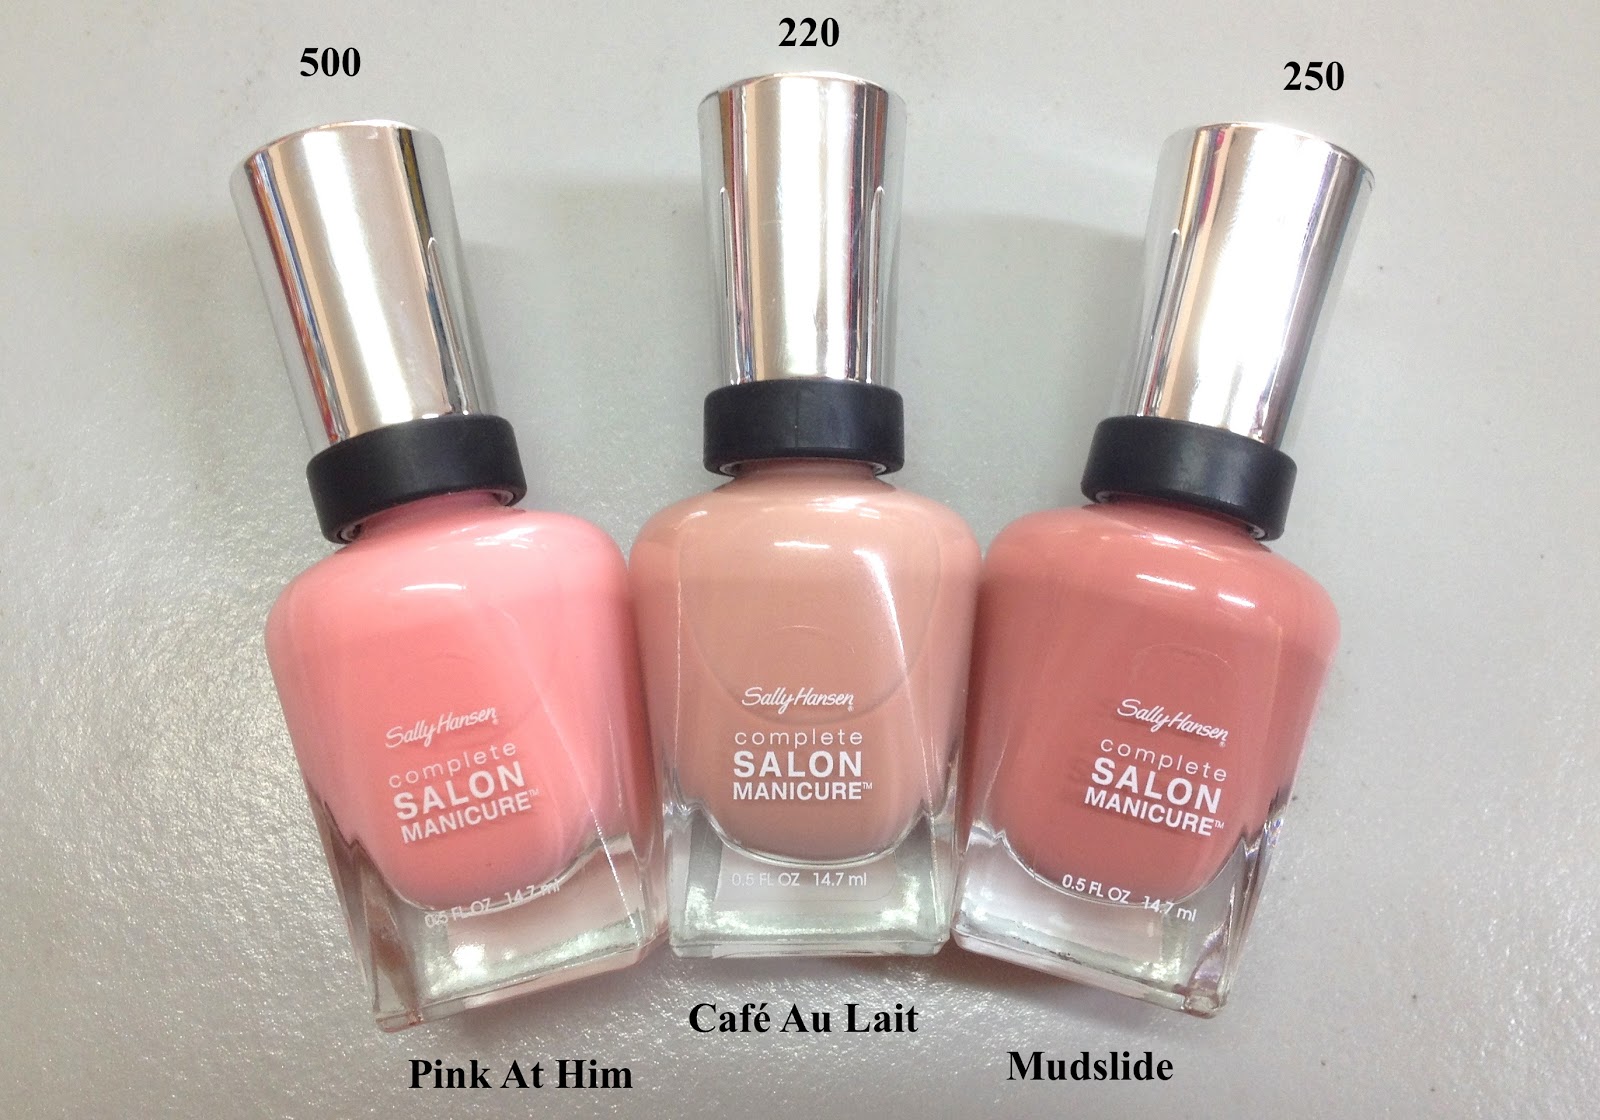 3. Printable coupon for $2 off any Sally Hansen Complete Salon Manicure Nail Color - wide 9